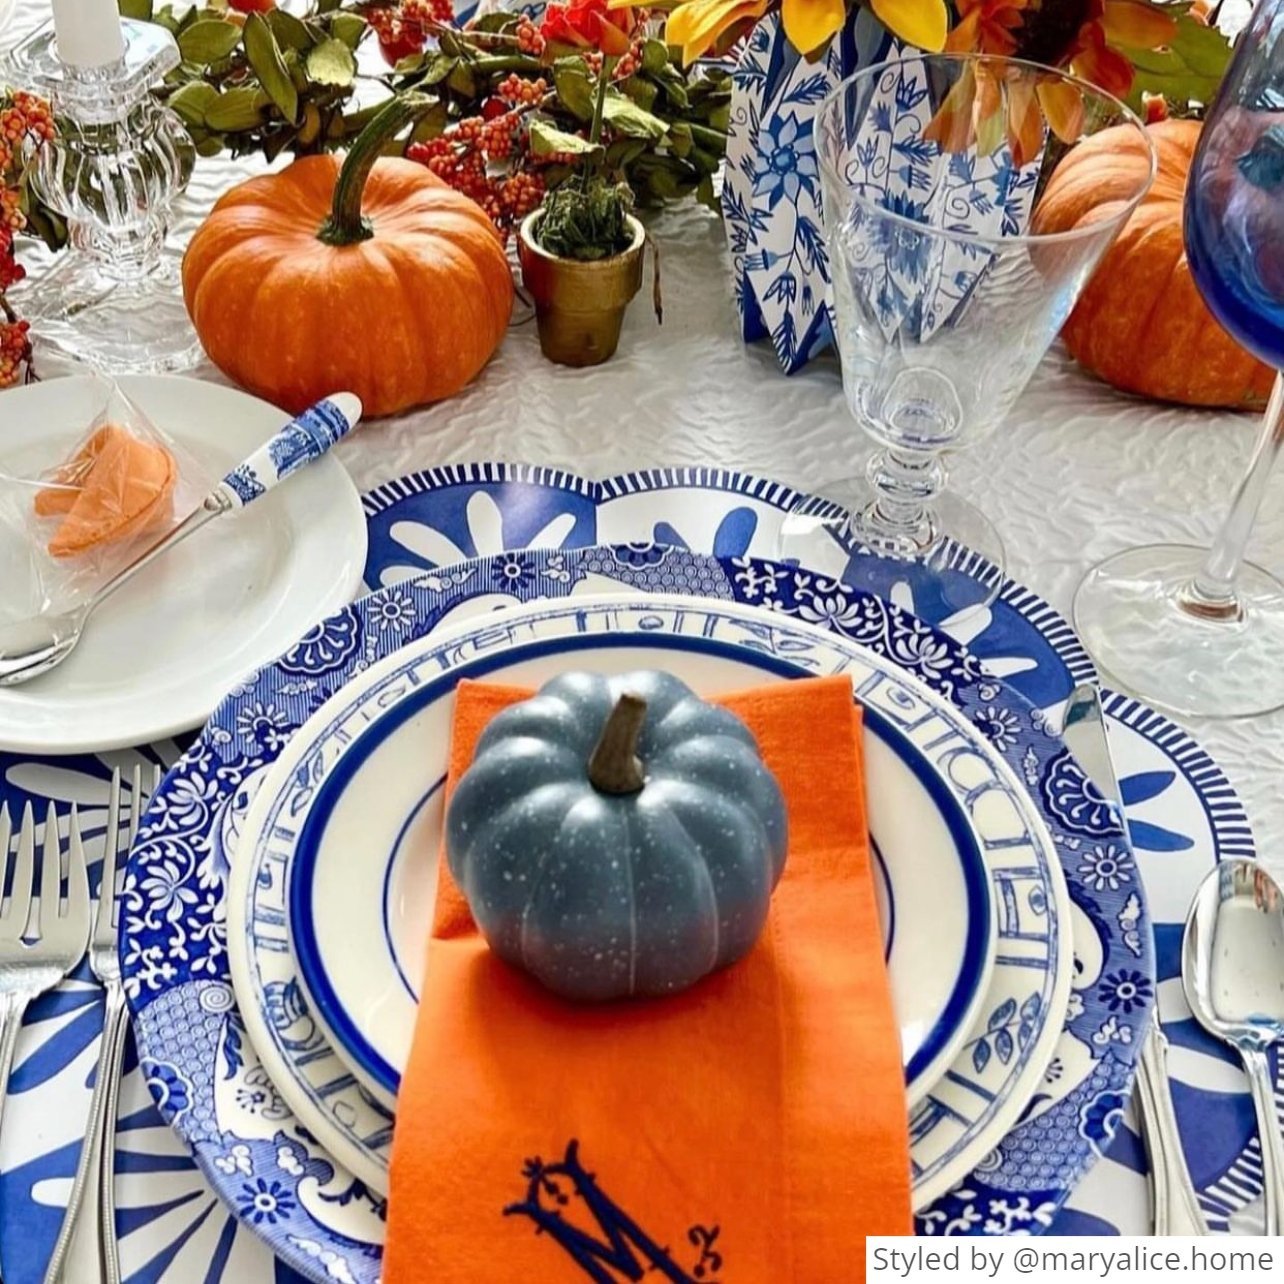 Blue and white scalloped round paper placemat layered with blue and white dishes and an orange napkin with a blue pumpkin on top